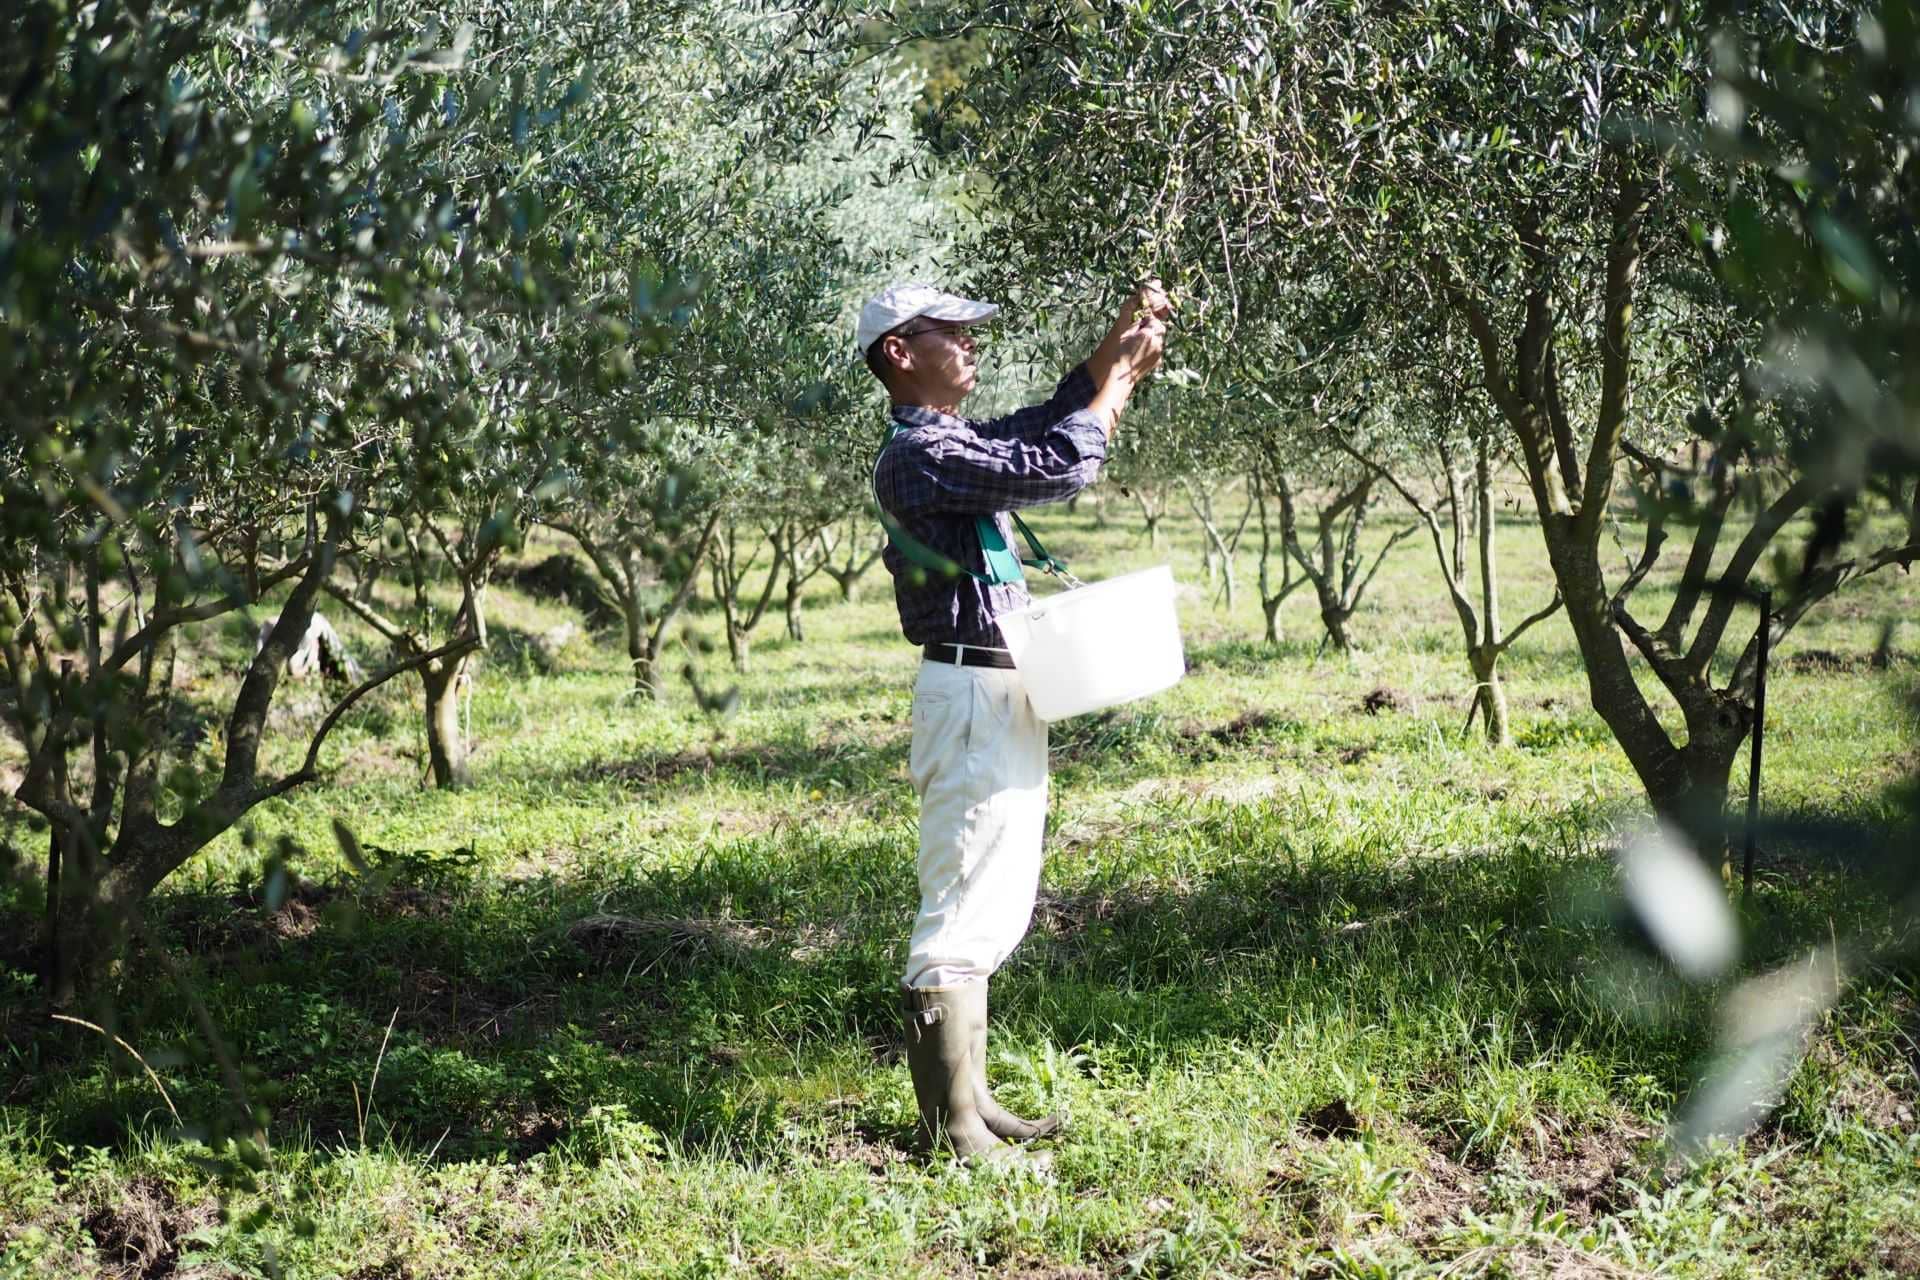 asia-competitions-profiles-the-best-olive-oils-awardwinning-producers-optimistic-as-olive-oil-culture-takes-root-in-japan-olive-oil-times